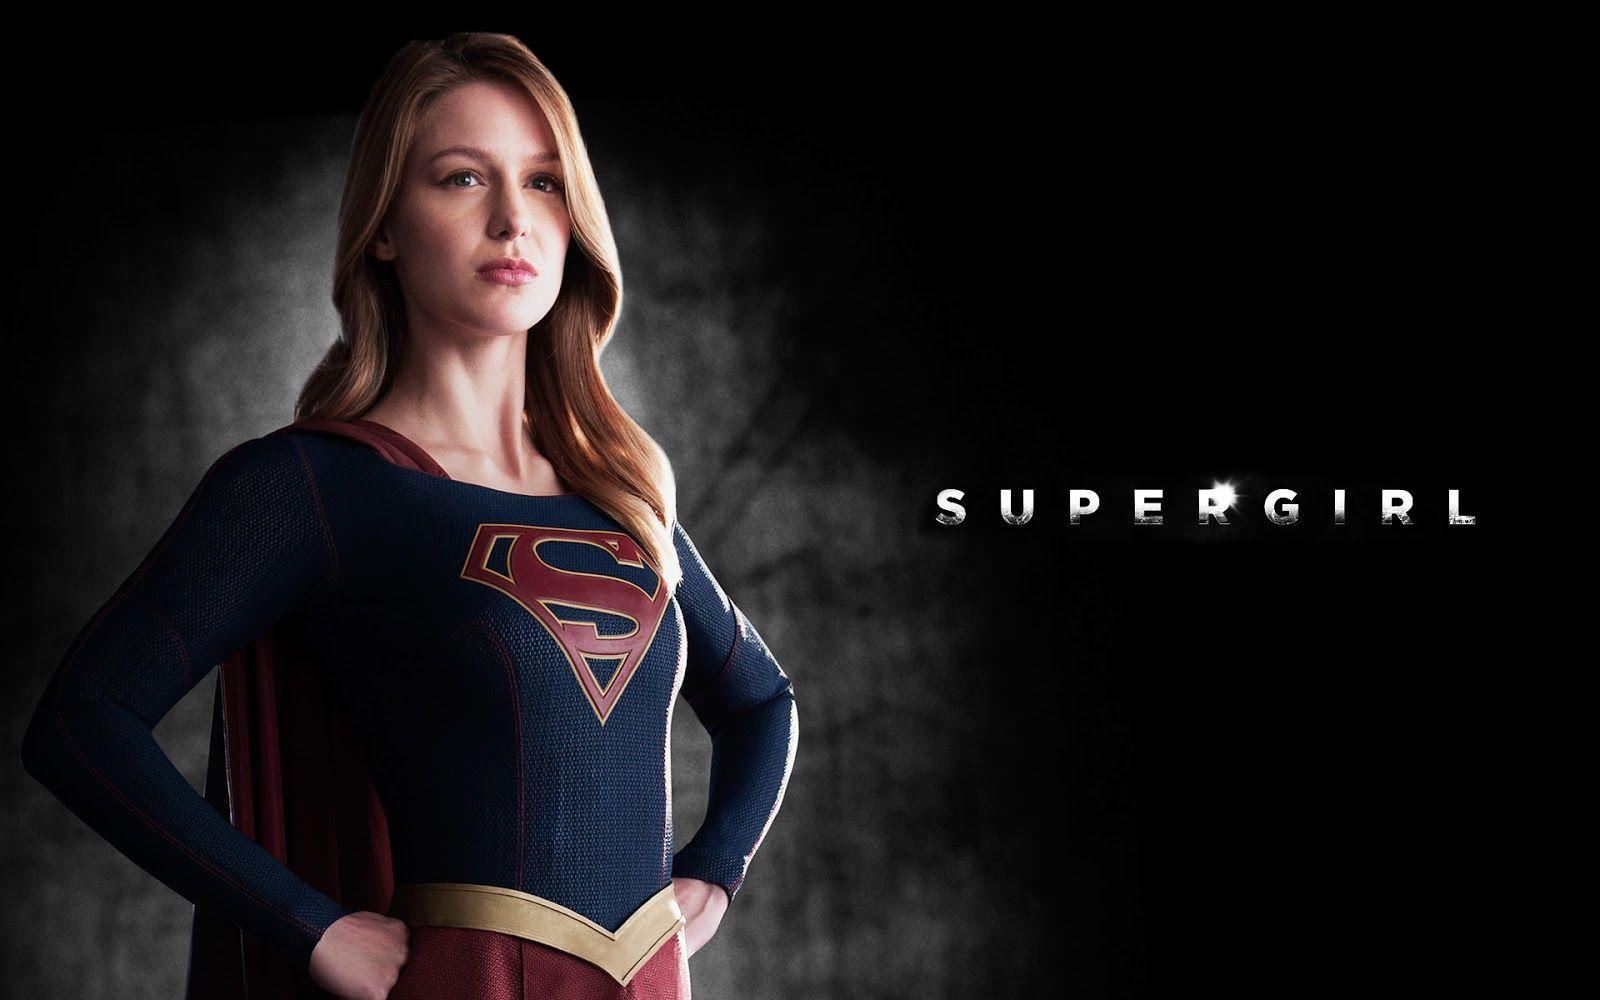 Supergirl Wallpaper HD 1920×1080 Supergirl Picture Wallpaper (45 Wallpaper). Adorable Wallpaper. Supergirl picture, Supergirl, Supergirl season